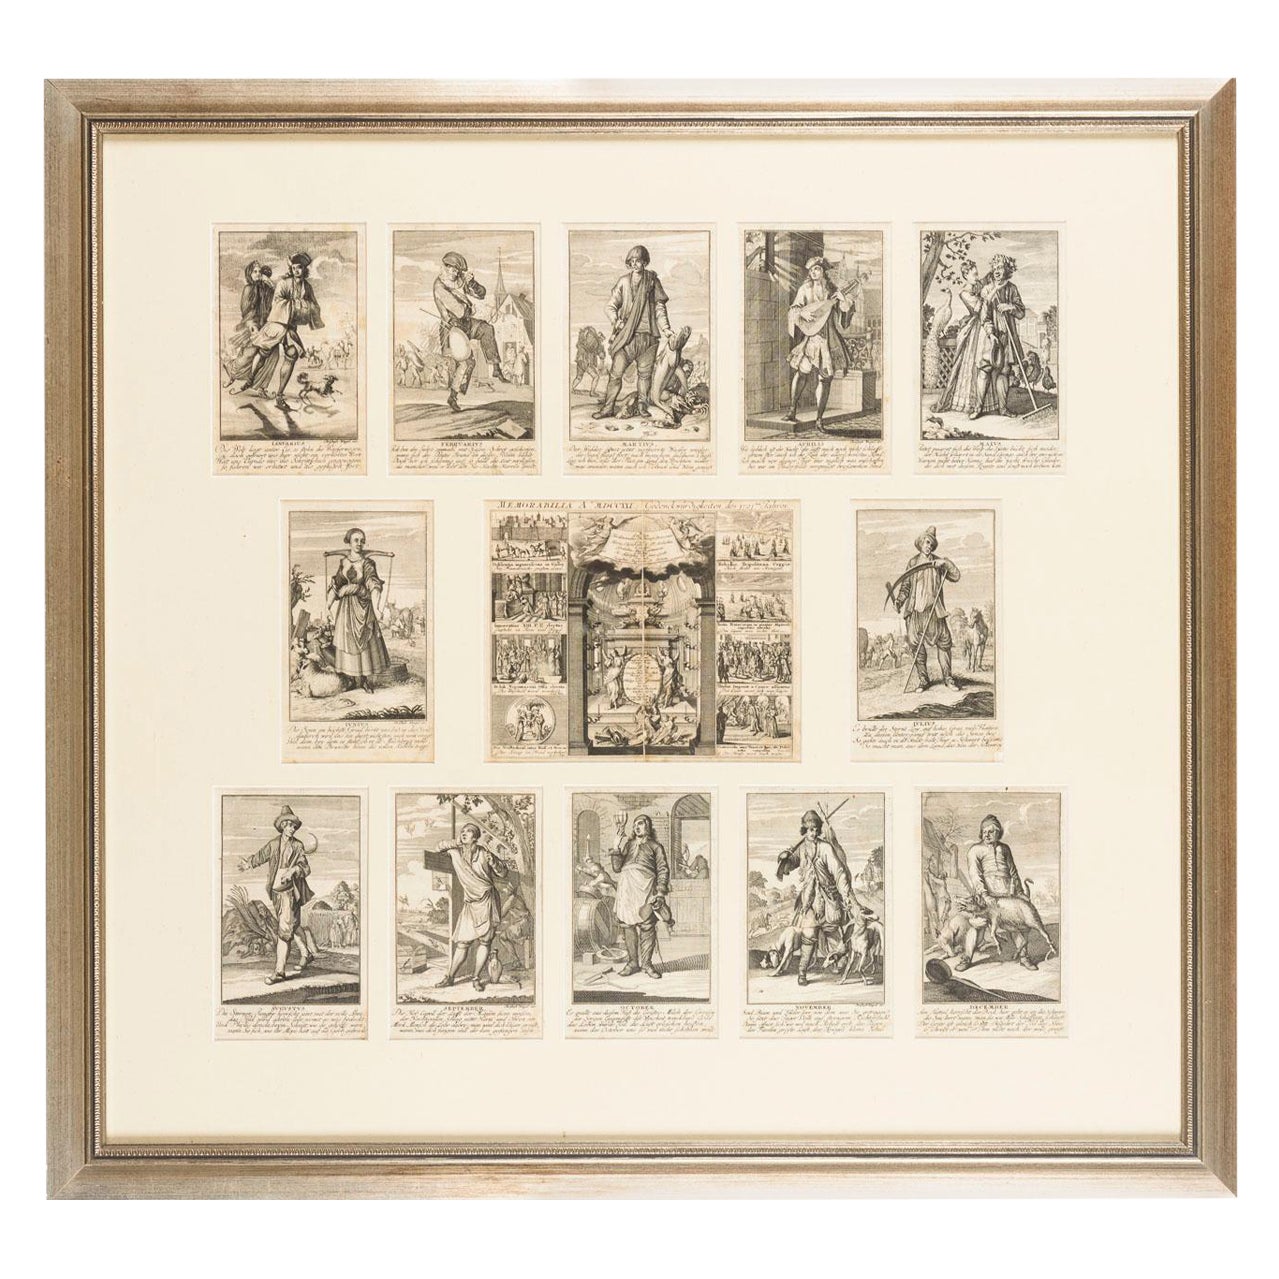 Beautiful Rare Antique Pocket Calendar for the Year 1722, Nicely Framed, c.1721 For Sale